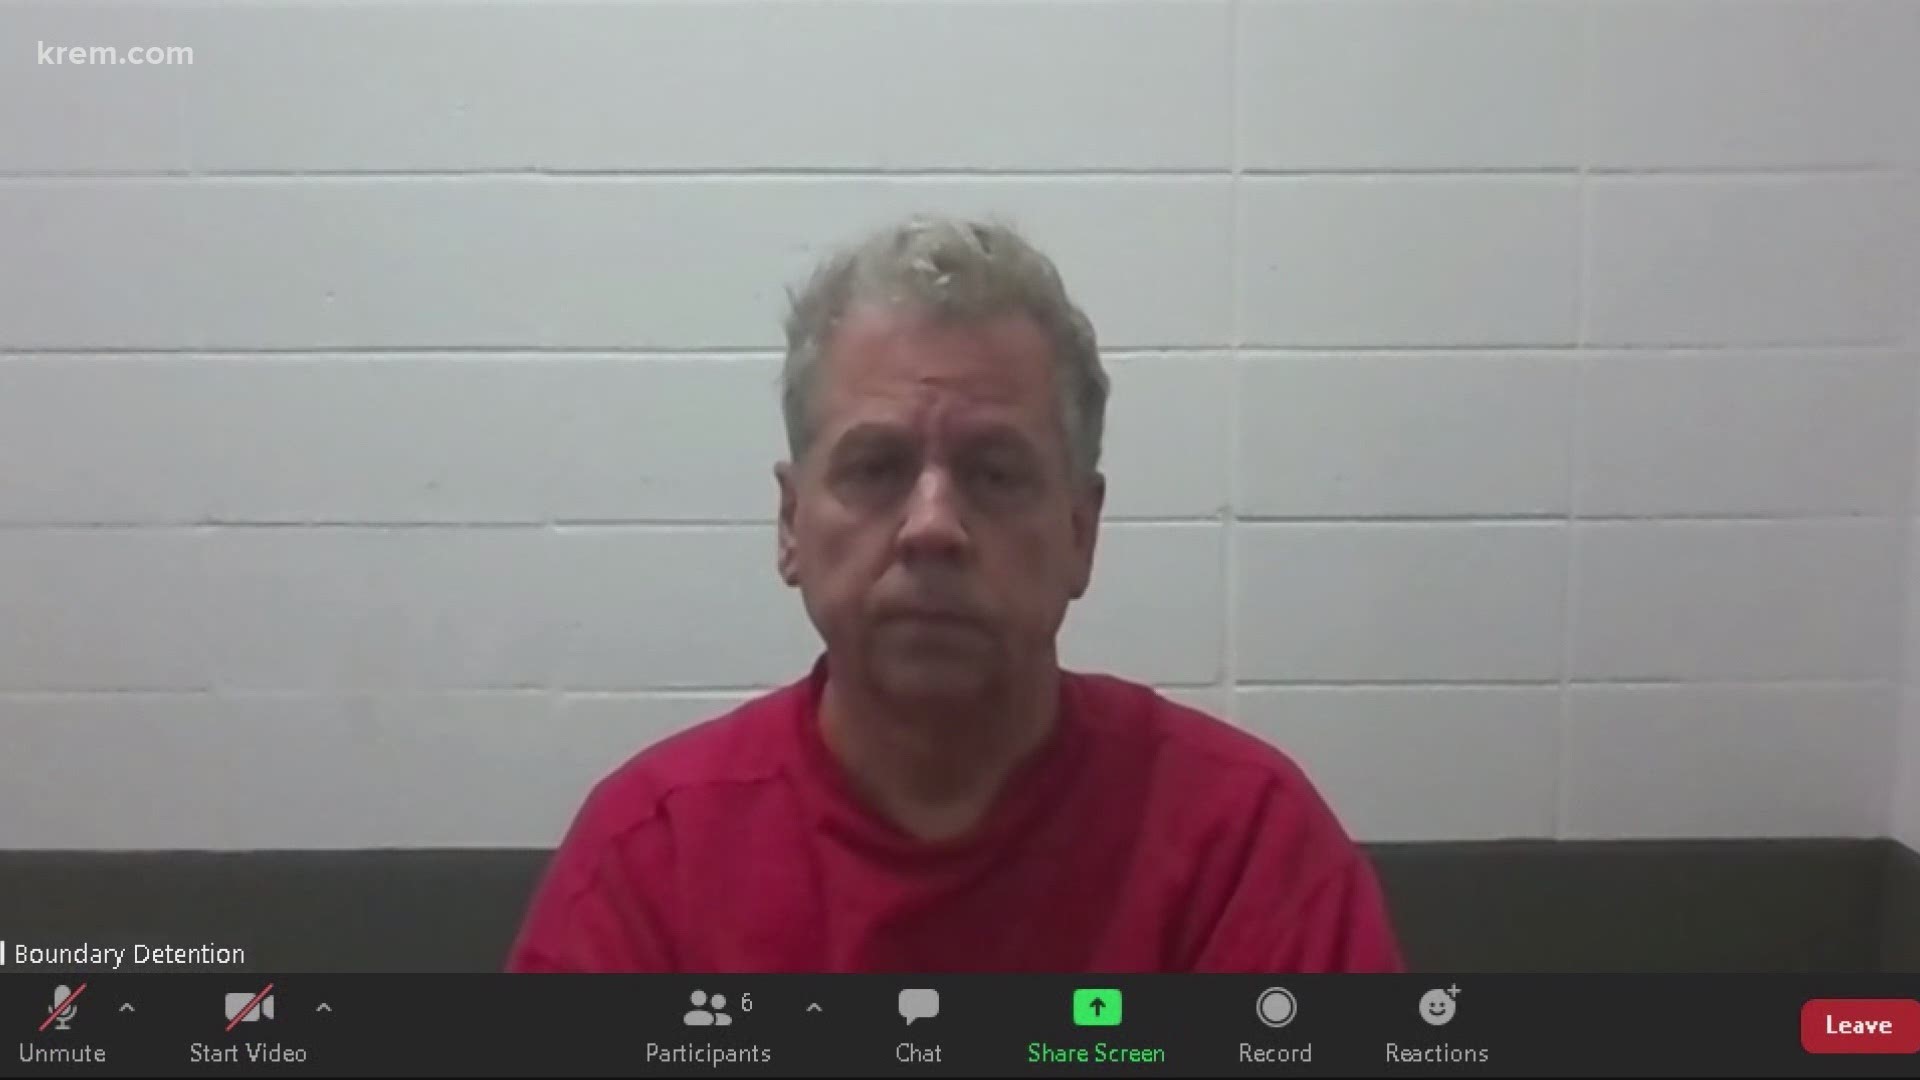 Daniel Moore, 63, is charged with second-degree murder in connection to the shooting death of Brian Drake, 45.